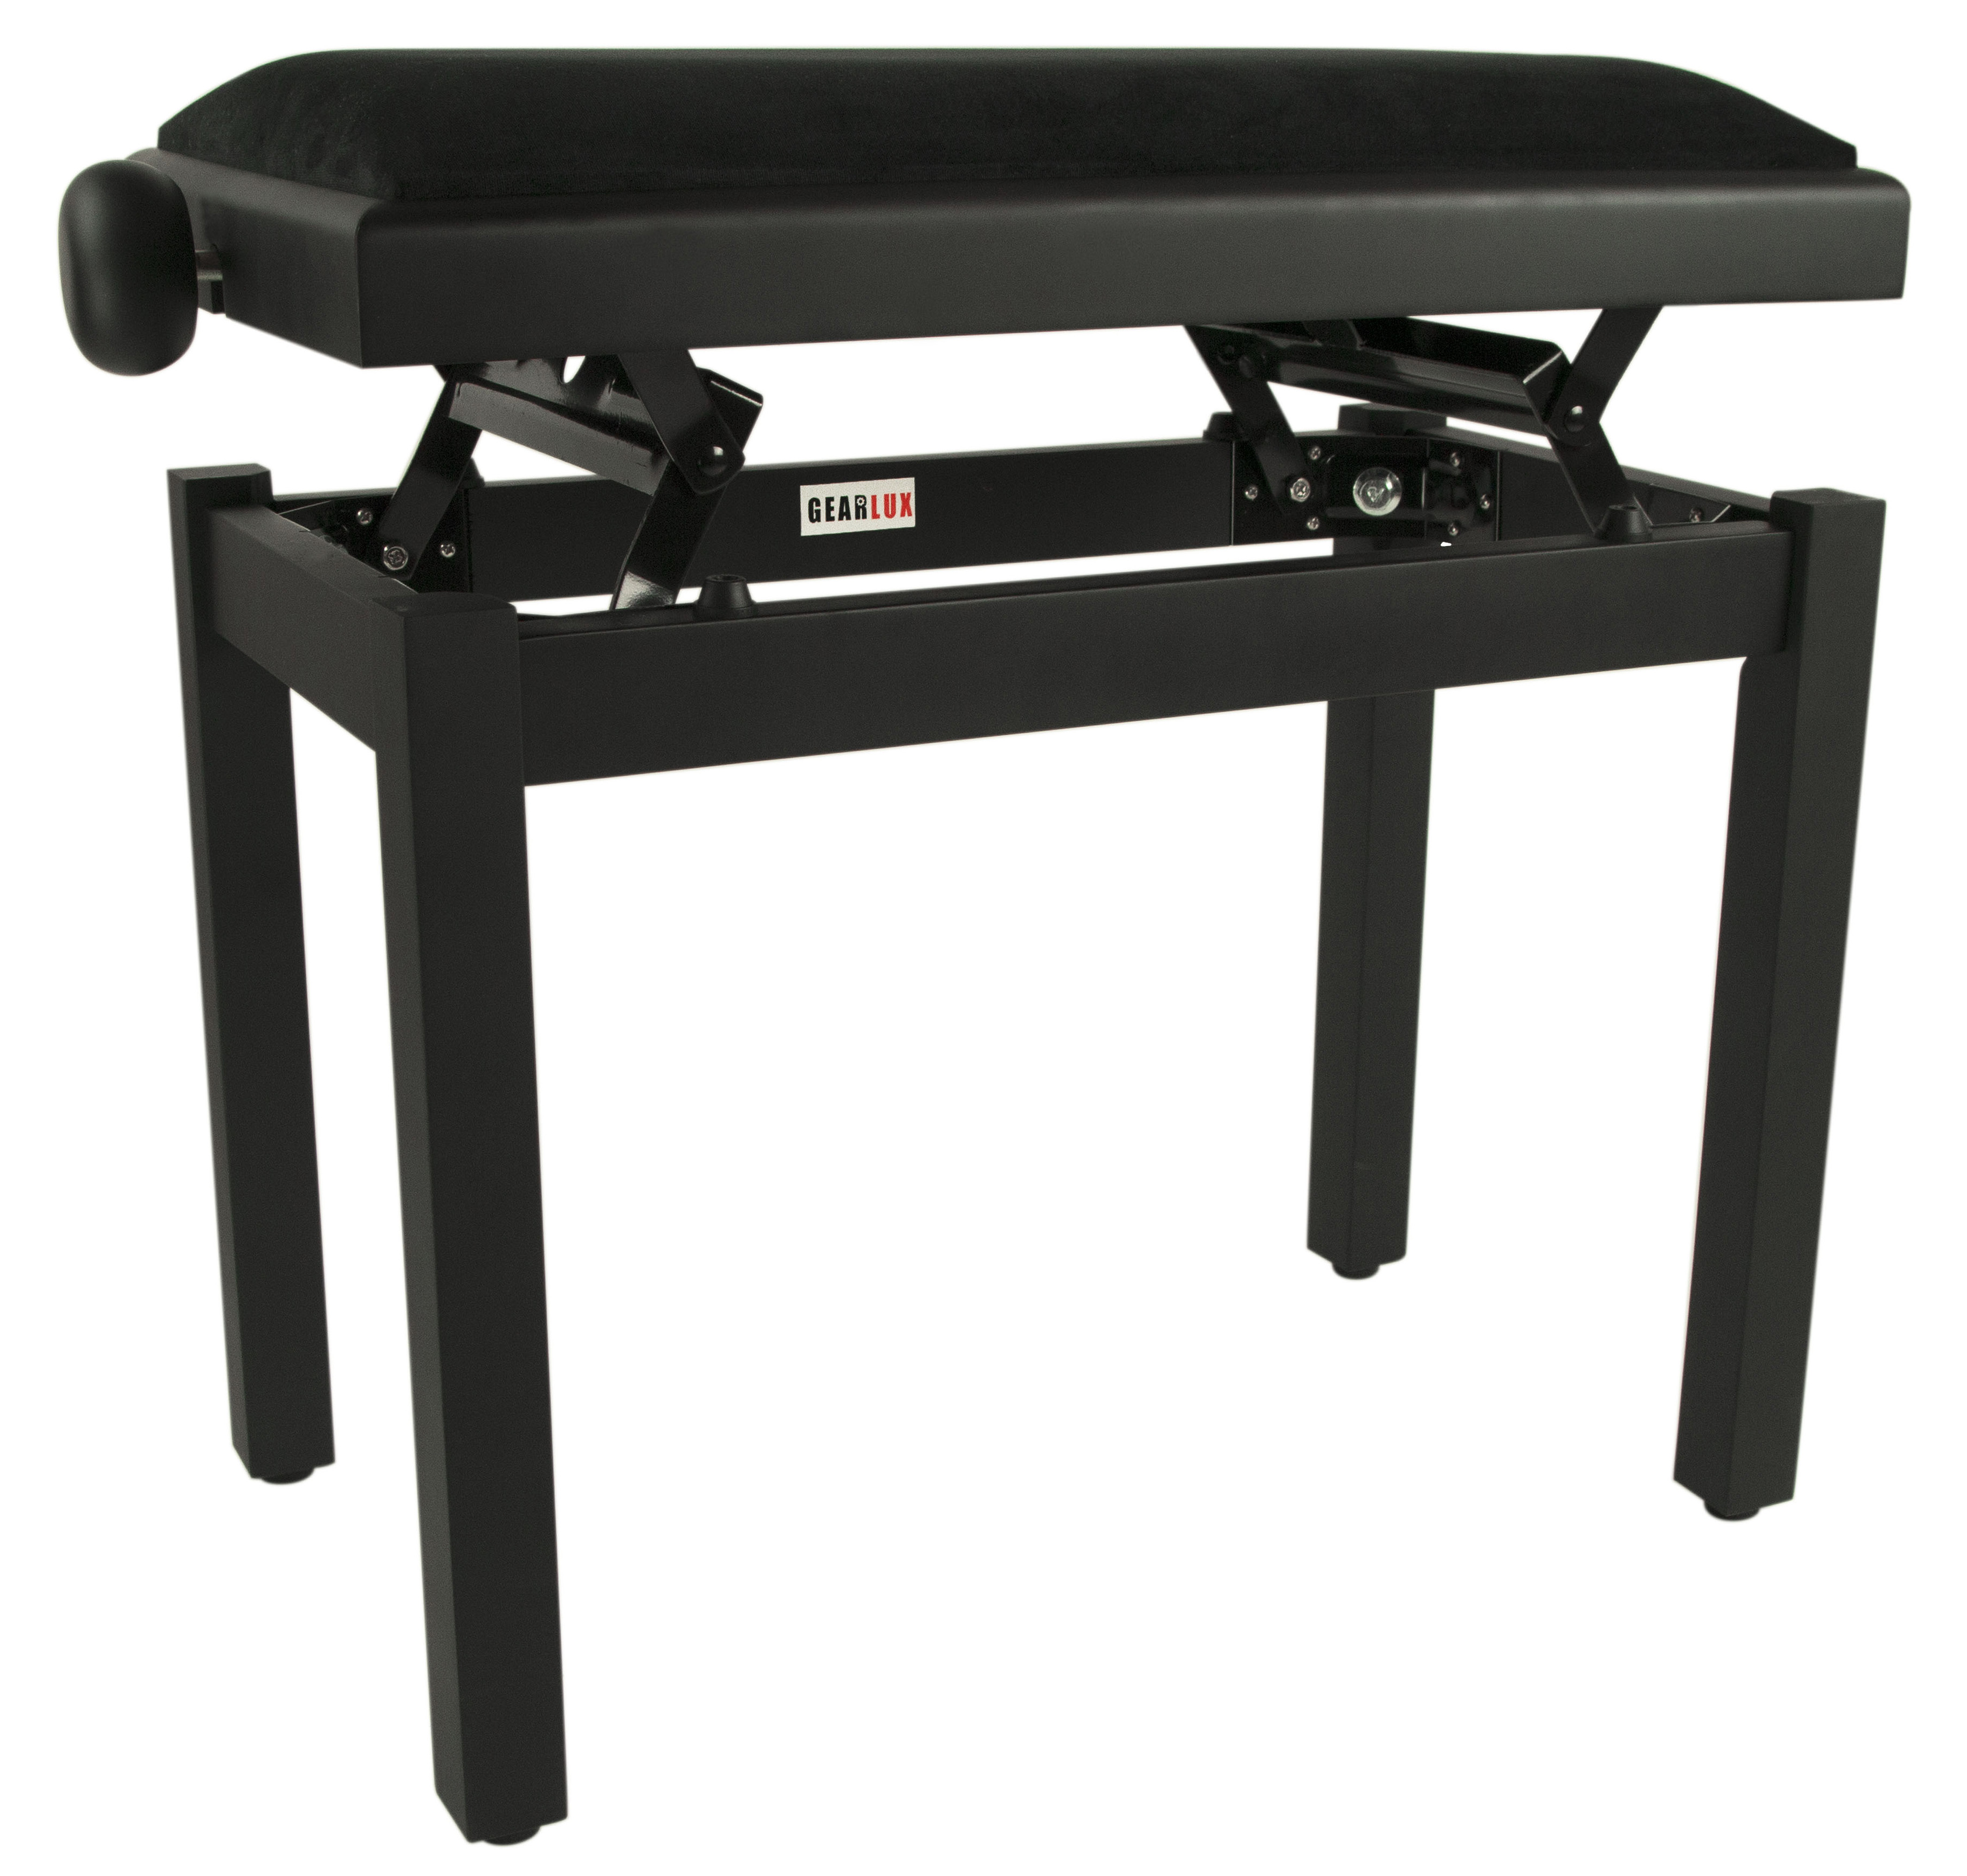 Gearlux Adjustable Piano Bench With Smooth Velvet Top Black